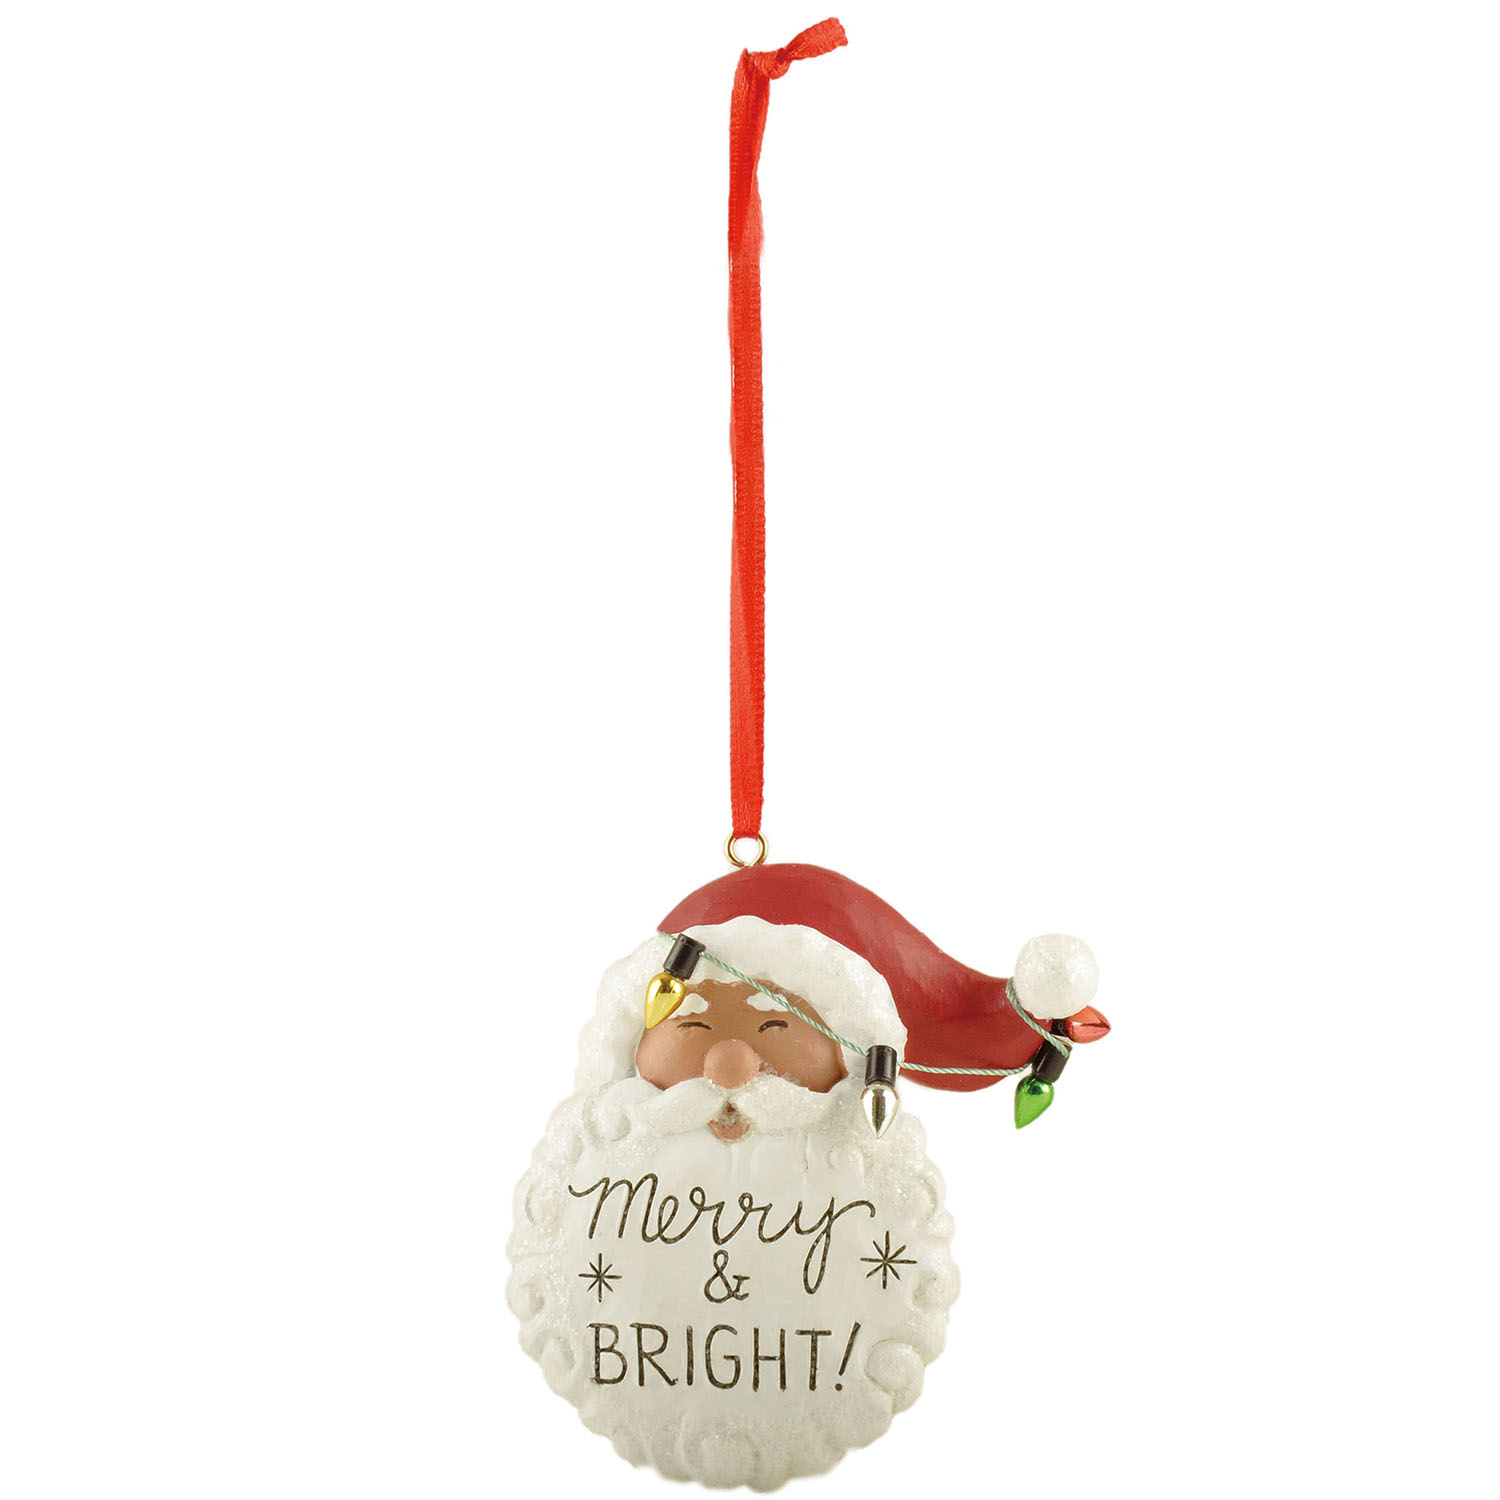 New Arrivals Resin Christmas Ornament Merry & Bright Santa w Colored Lights Christmas Ornament for Home Decor 238-52130